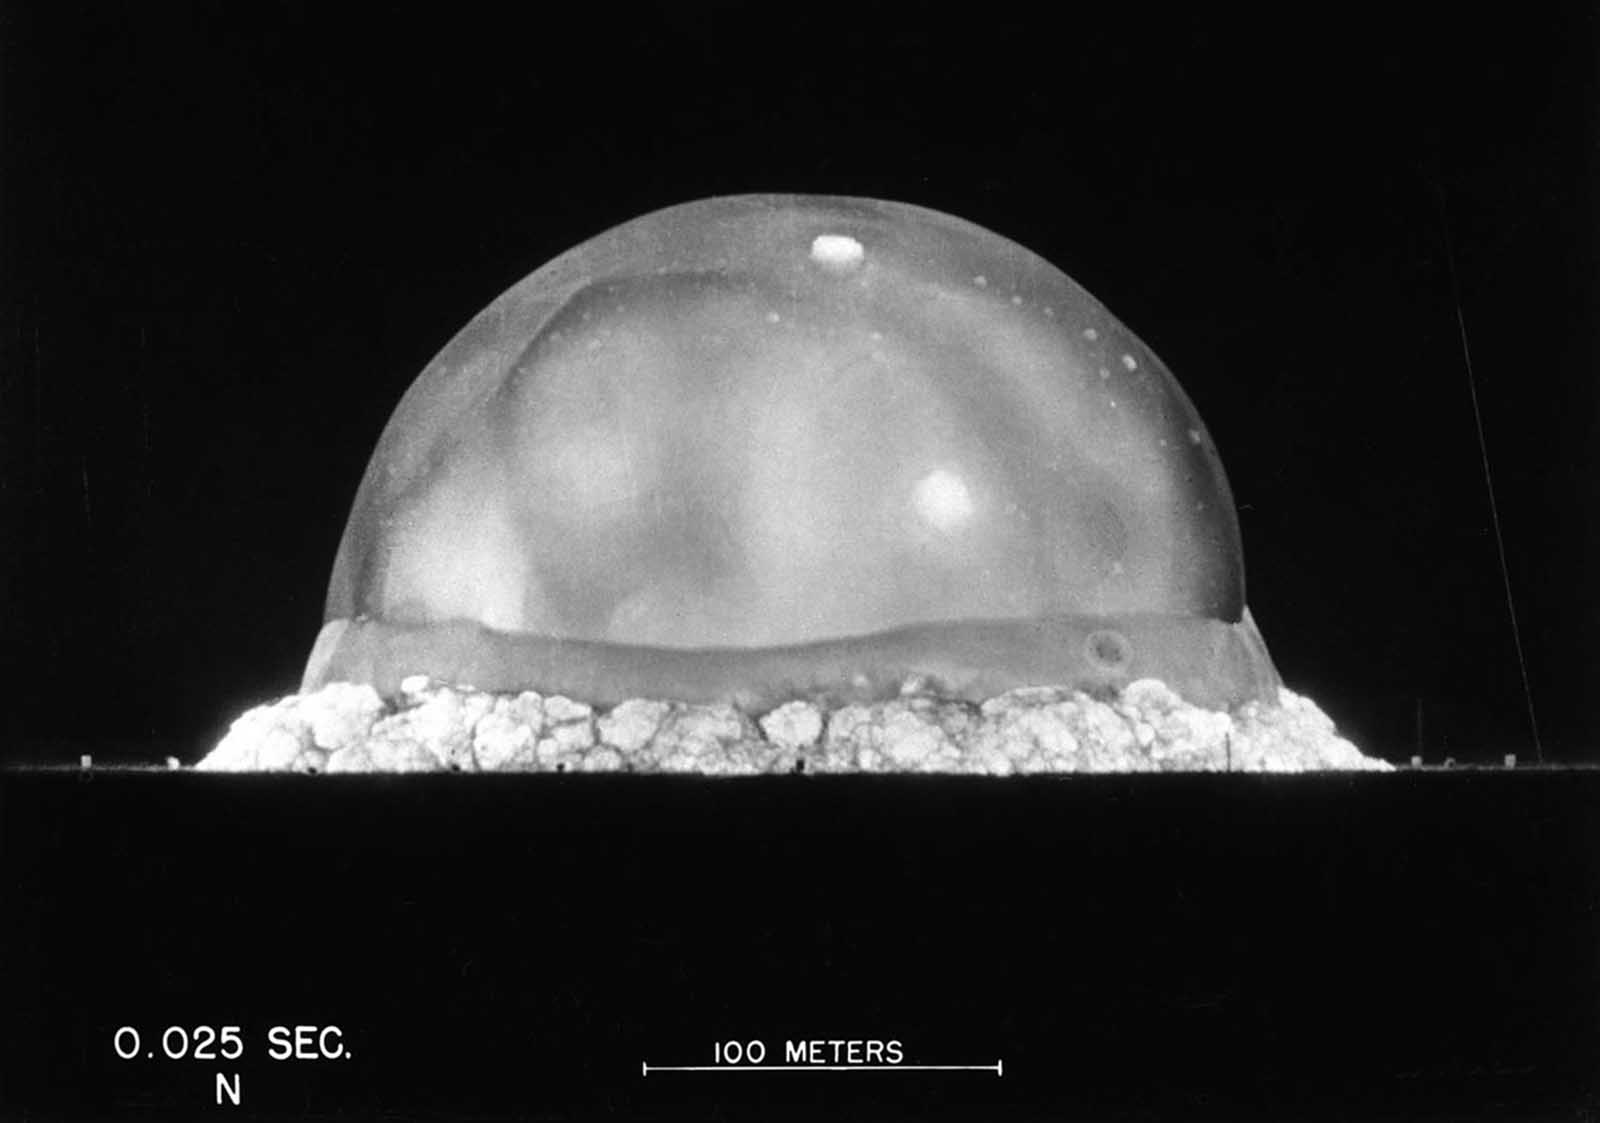 The expanding fireball and shockwave of the Trinity explosion, seen .025 seconds after detonation on July 16, 1945.